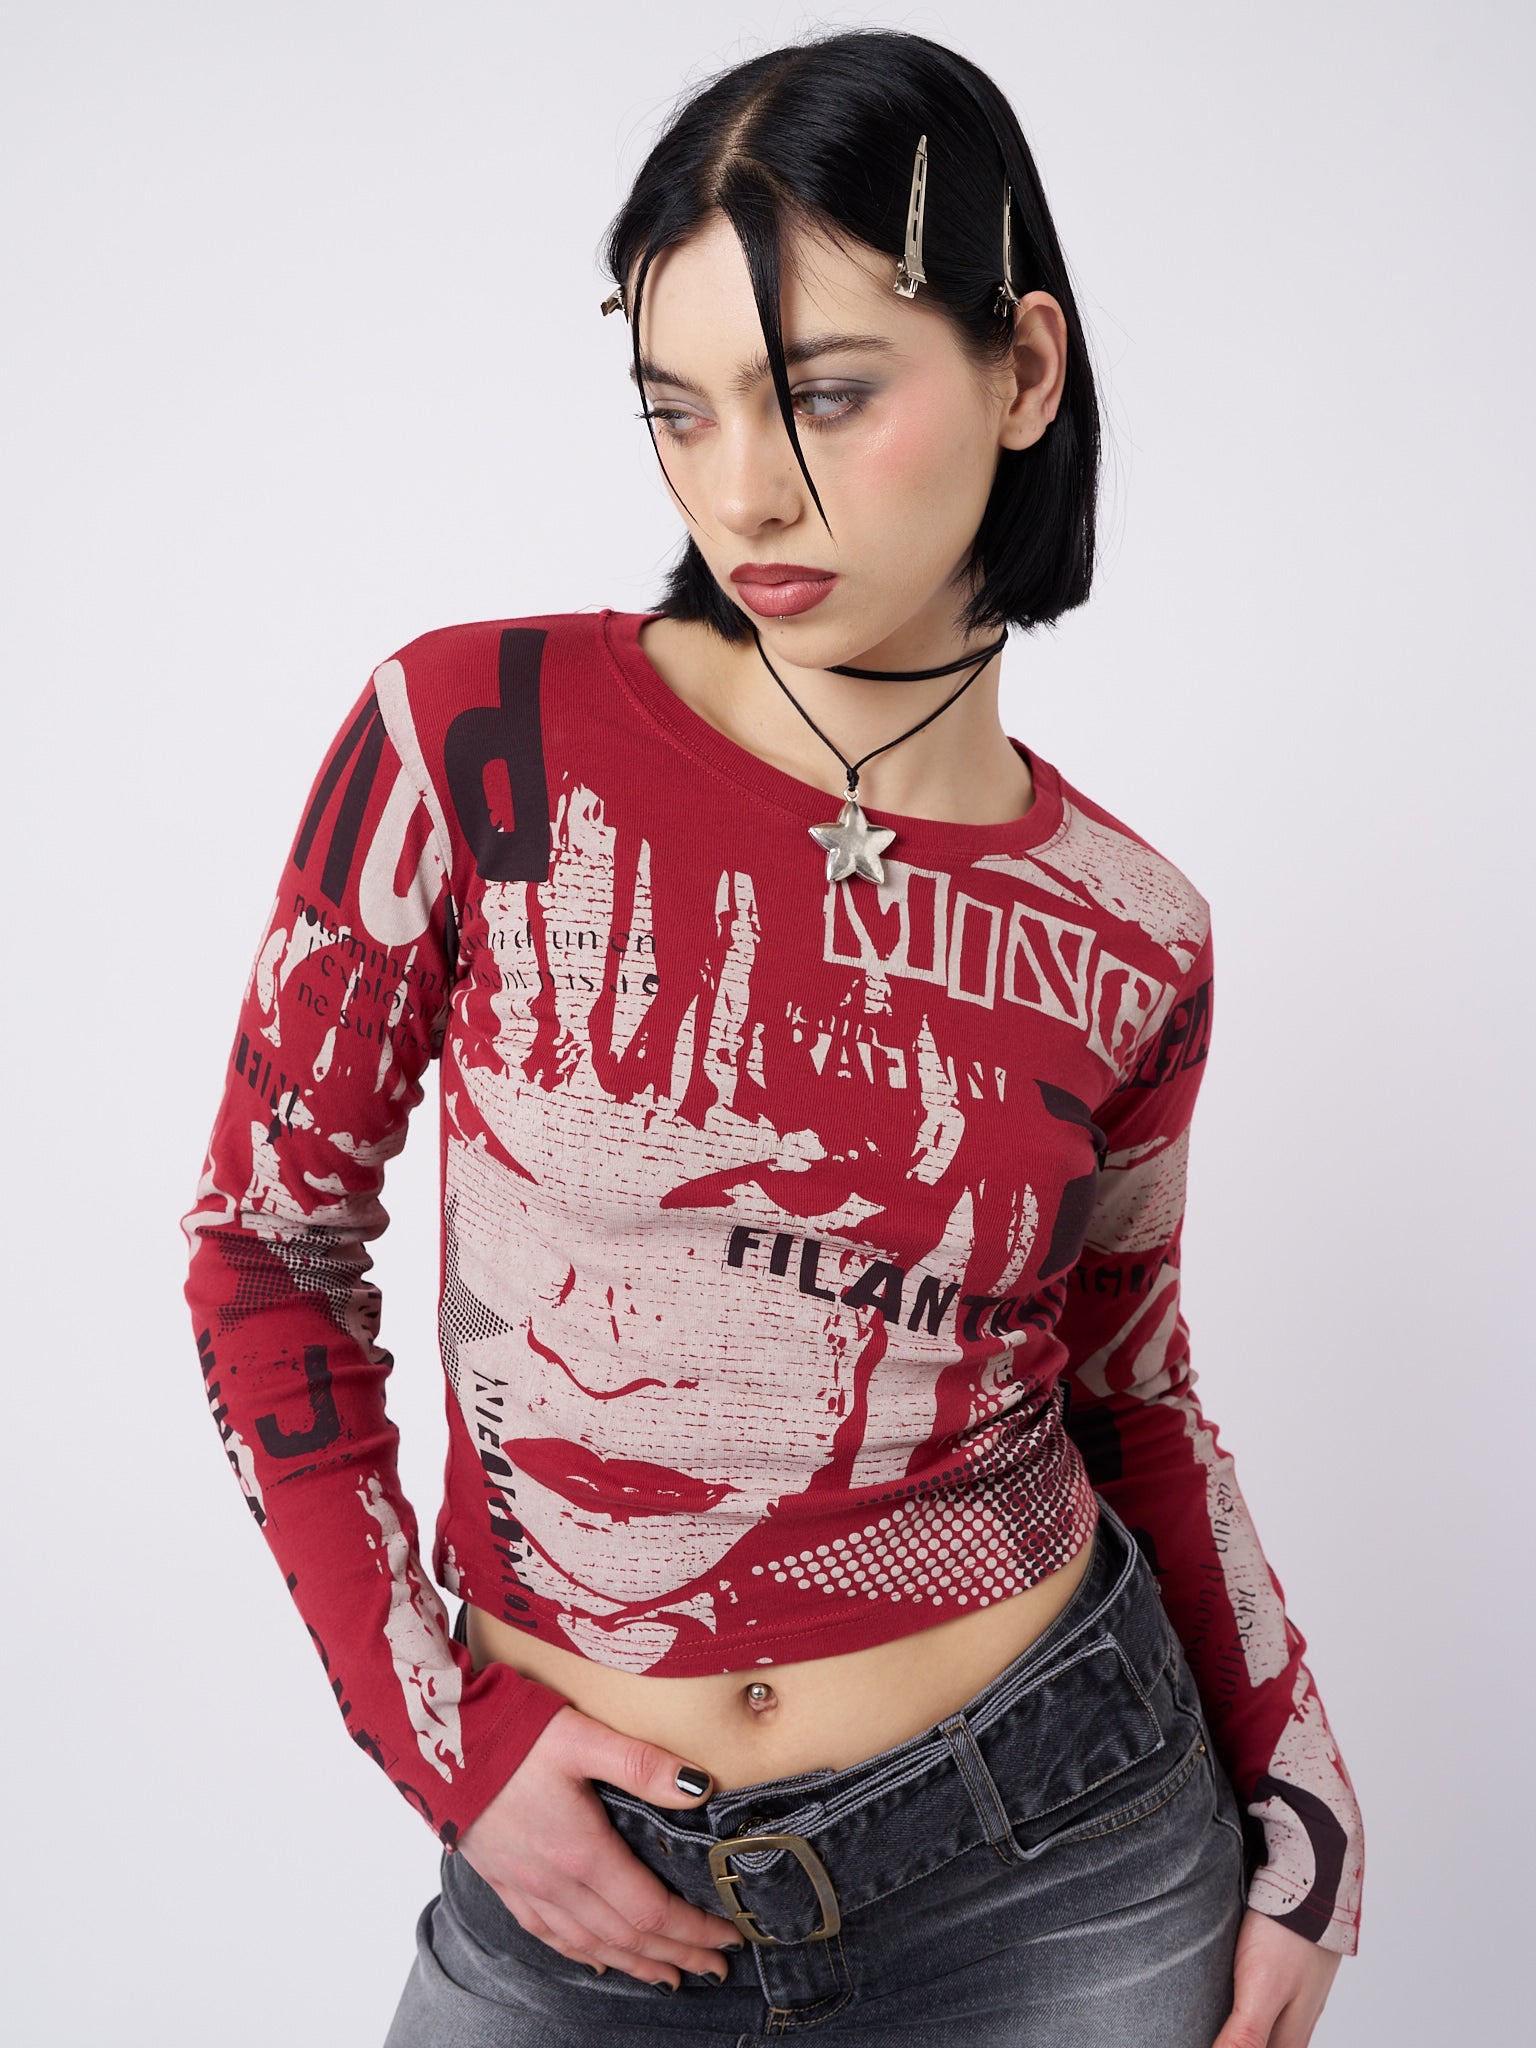 A red and black graphic top by Minga London. The top features a bold and eye-catching graphic design in contrasting colors. It has a comfortable fit and is made from high-quality materials. 